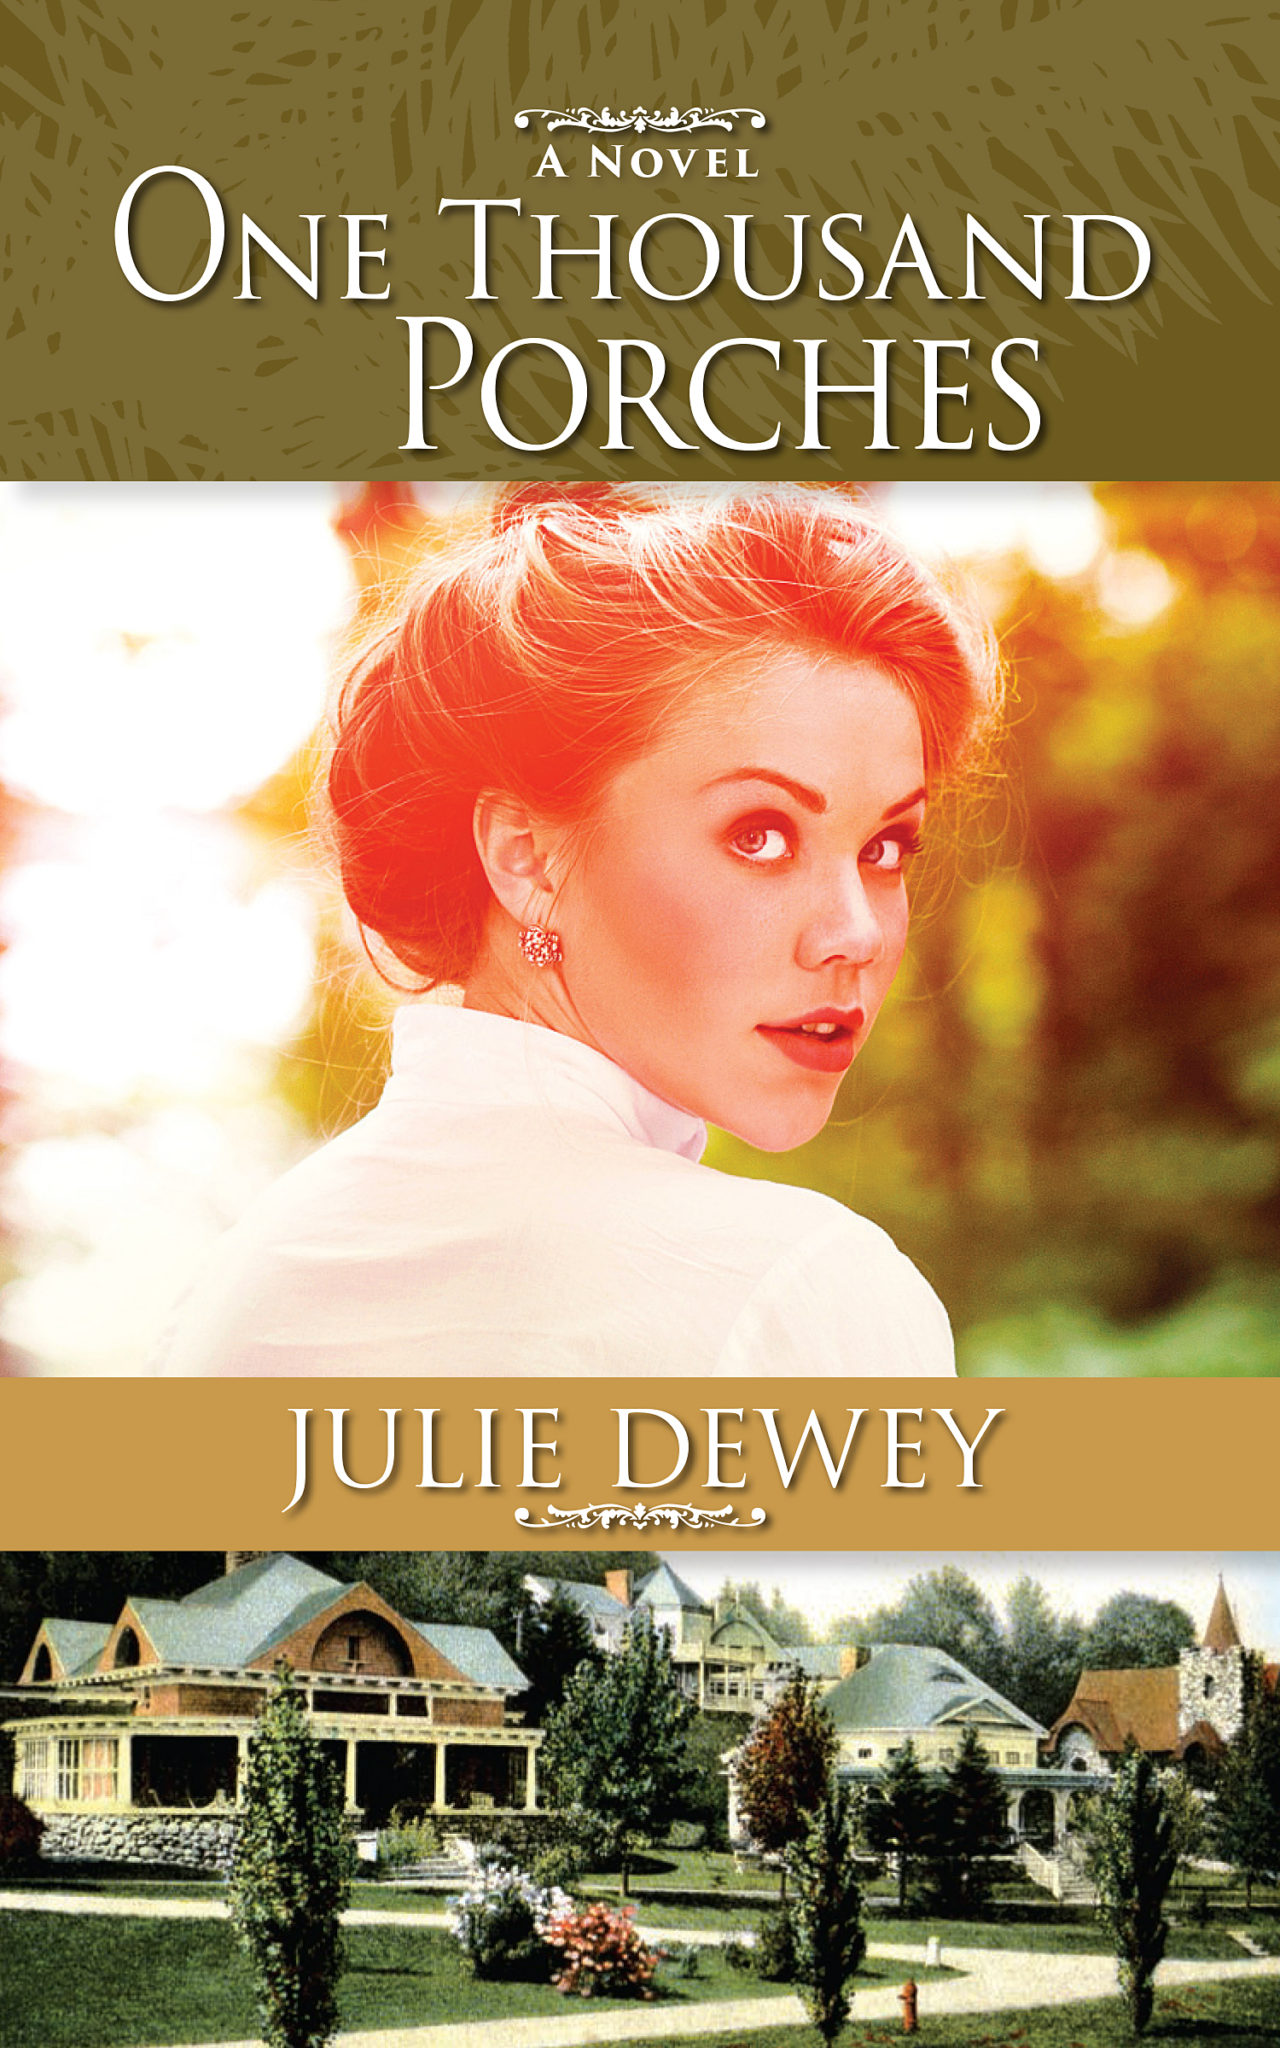 One Thousand Porches by Julie Dewey